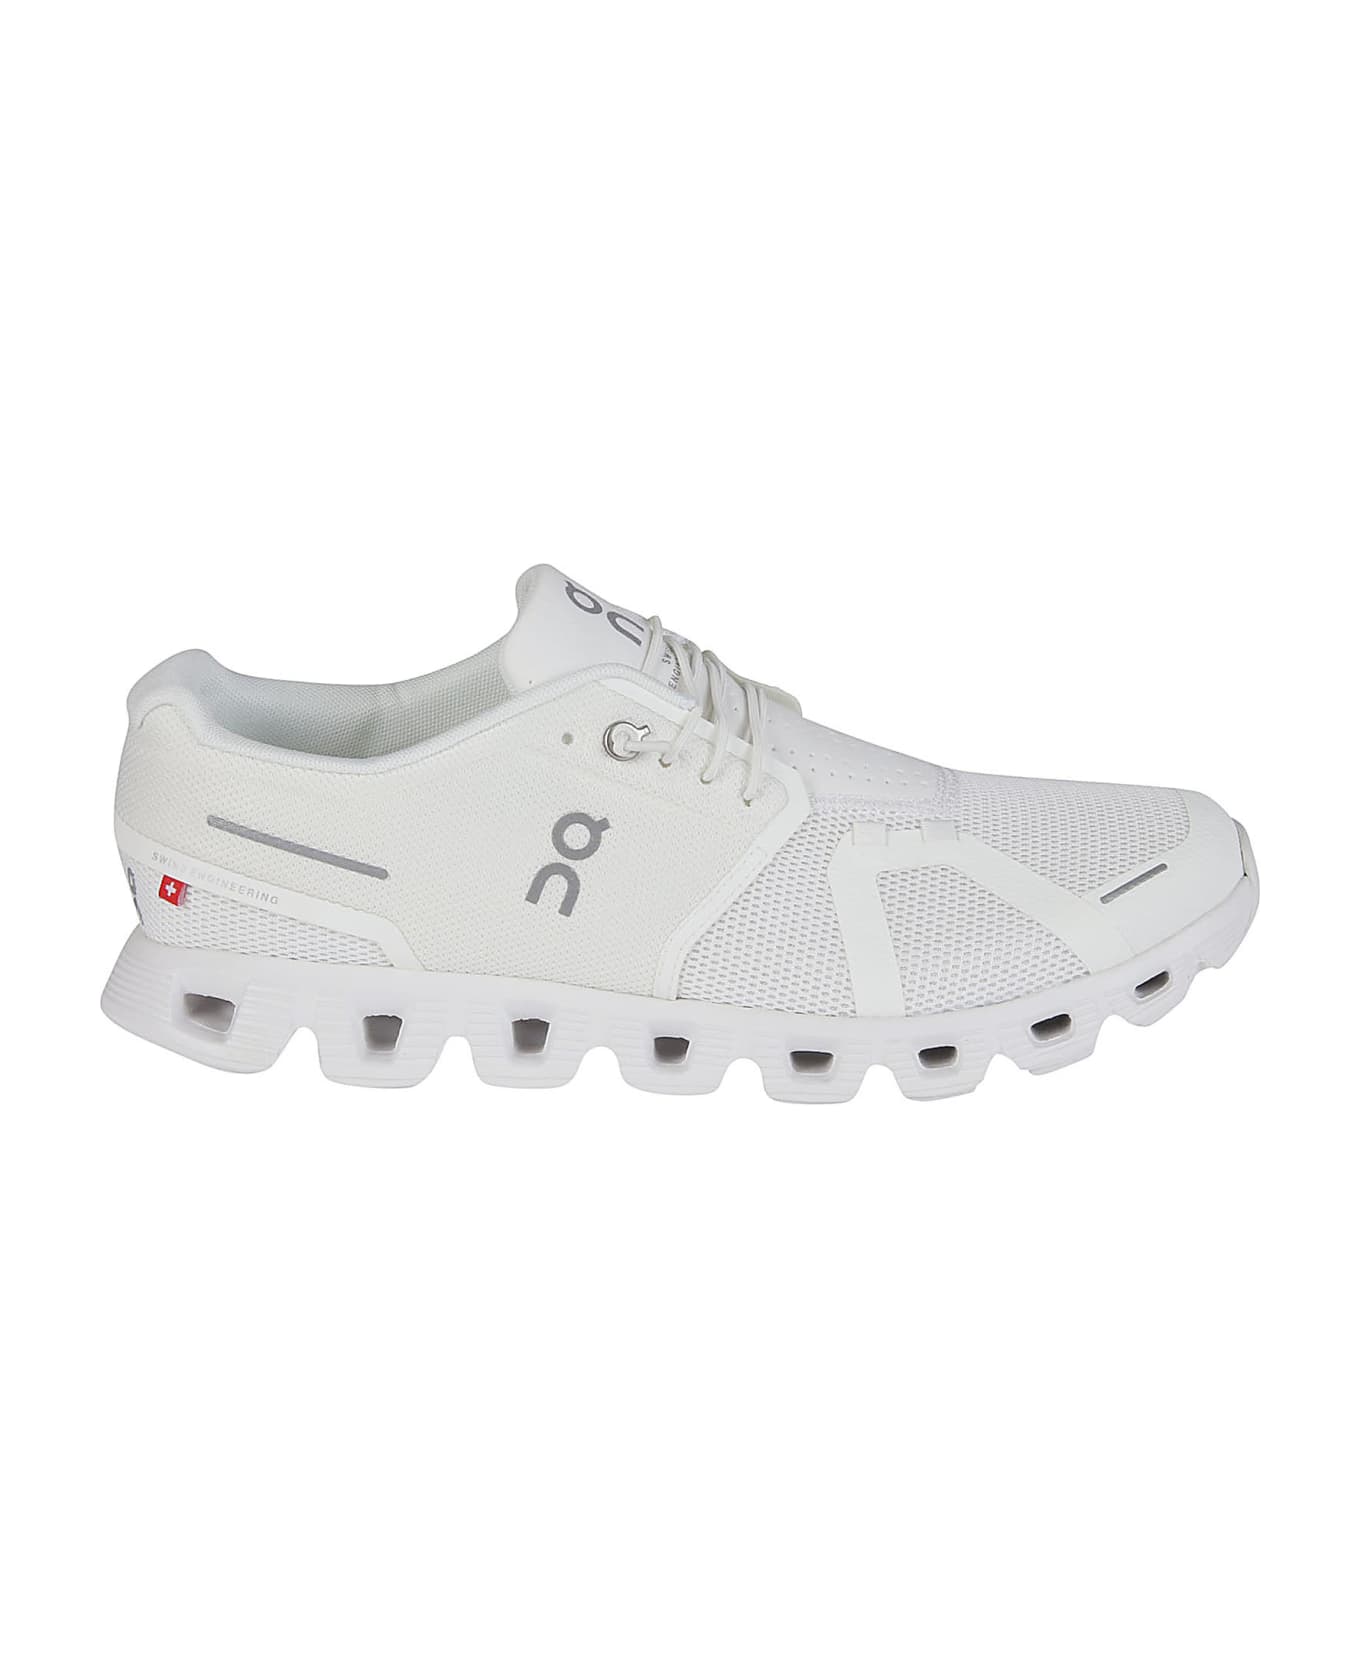 ON Cloud 5 Sneakers - Undyed/white/white スニーカー